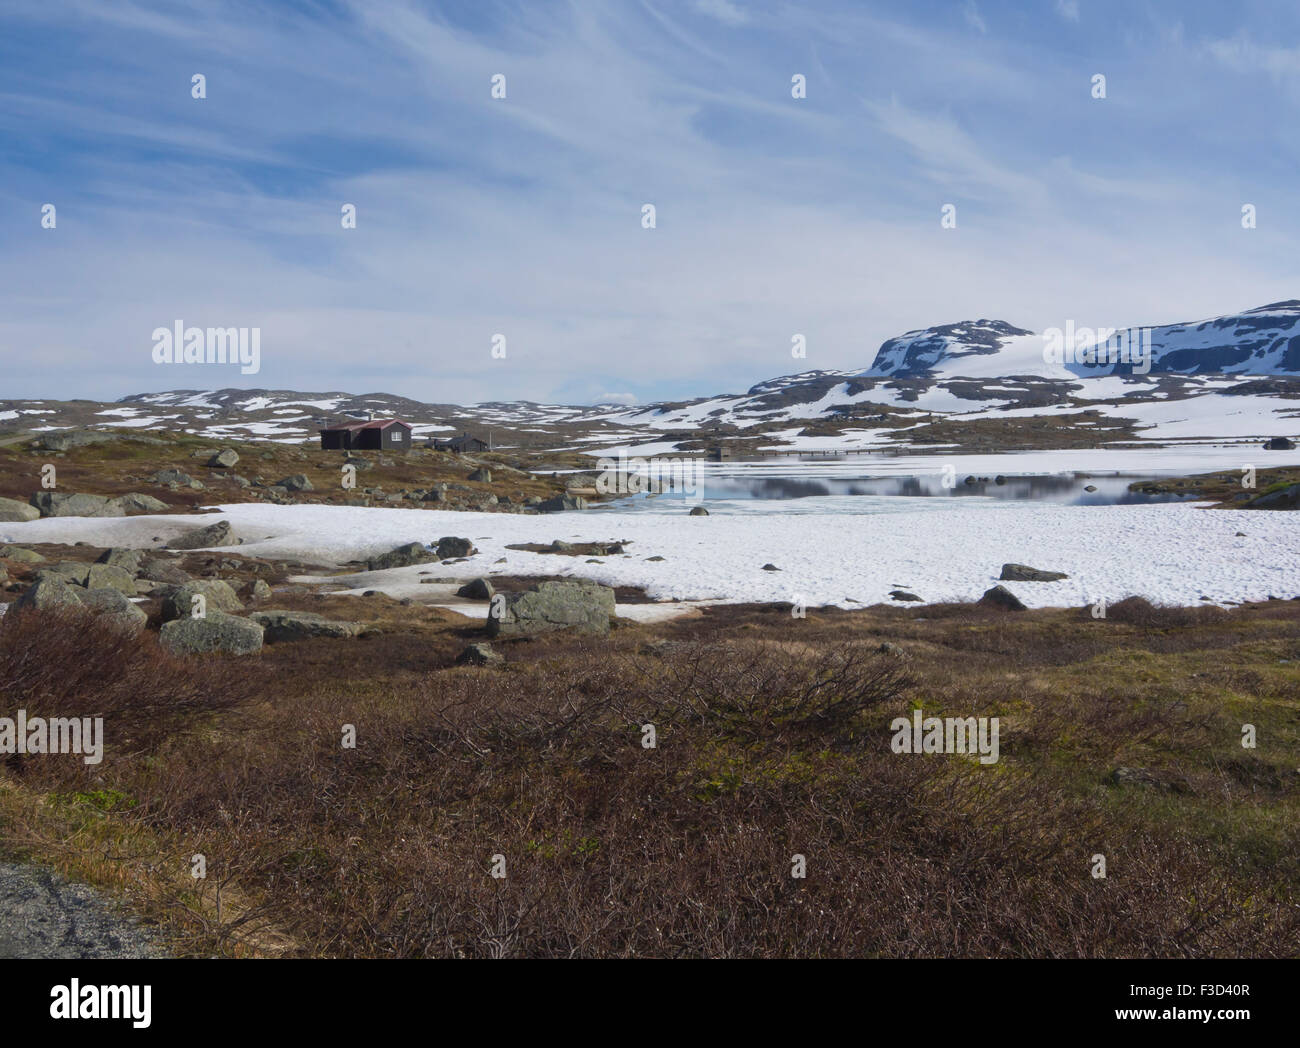 Panorama view in the Norwegian mountains, small cabin, lake, patches of snow and distant glacier, Finse, Hardangervidda Norway Stock Photo